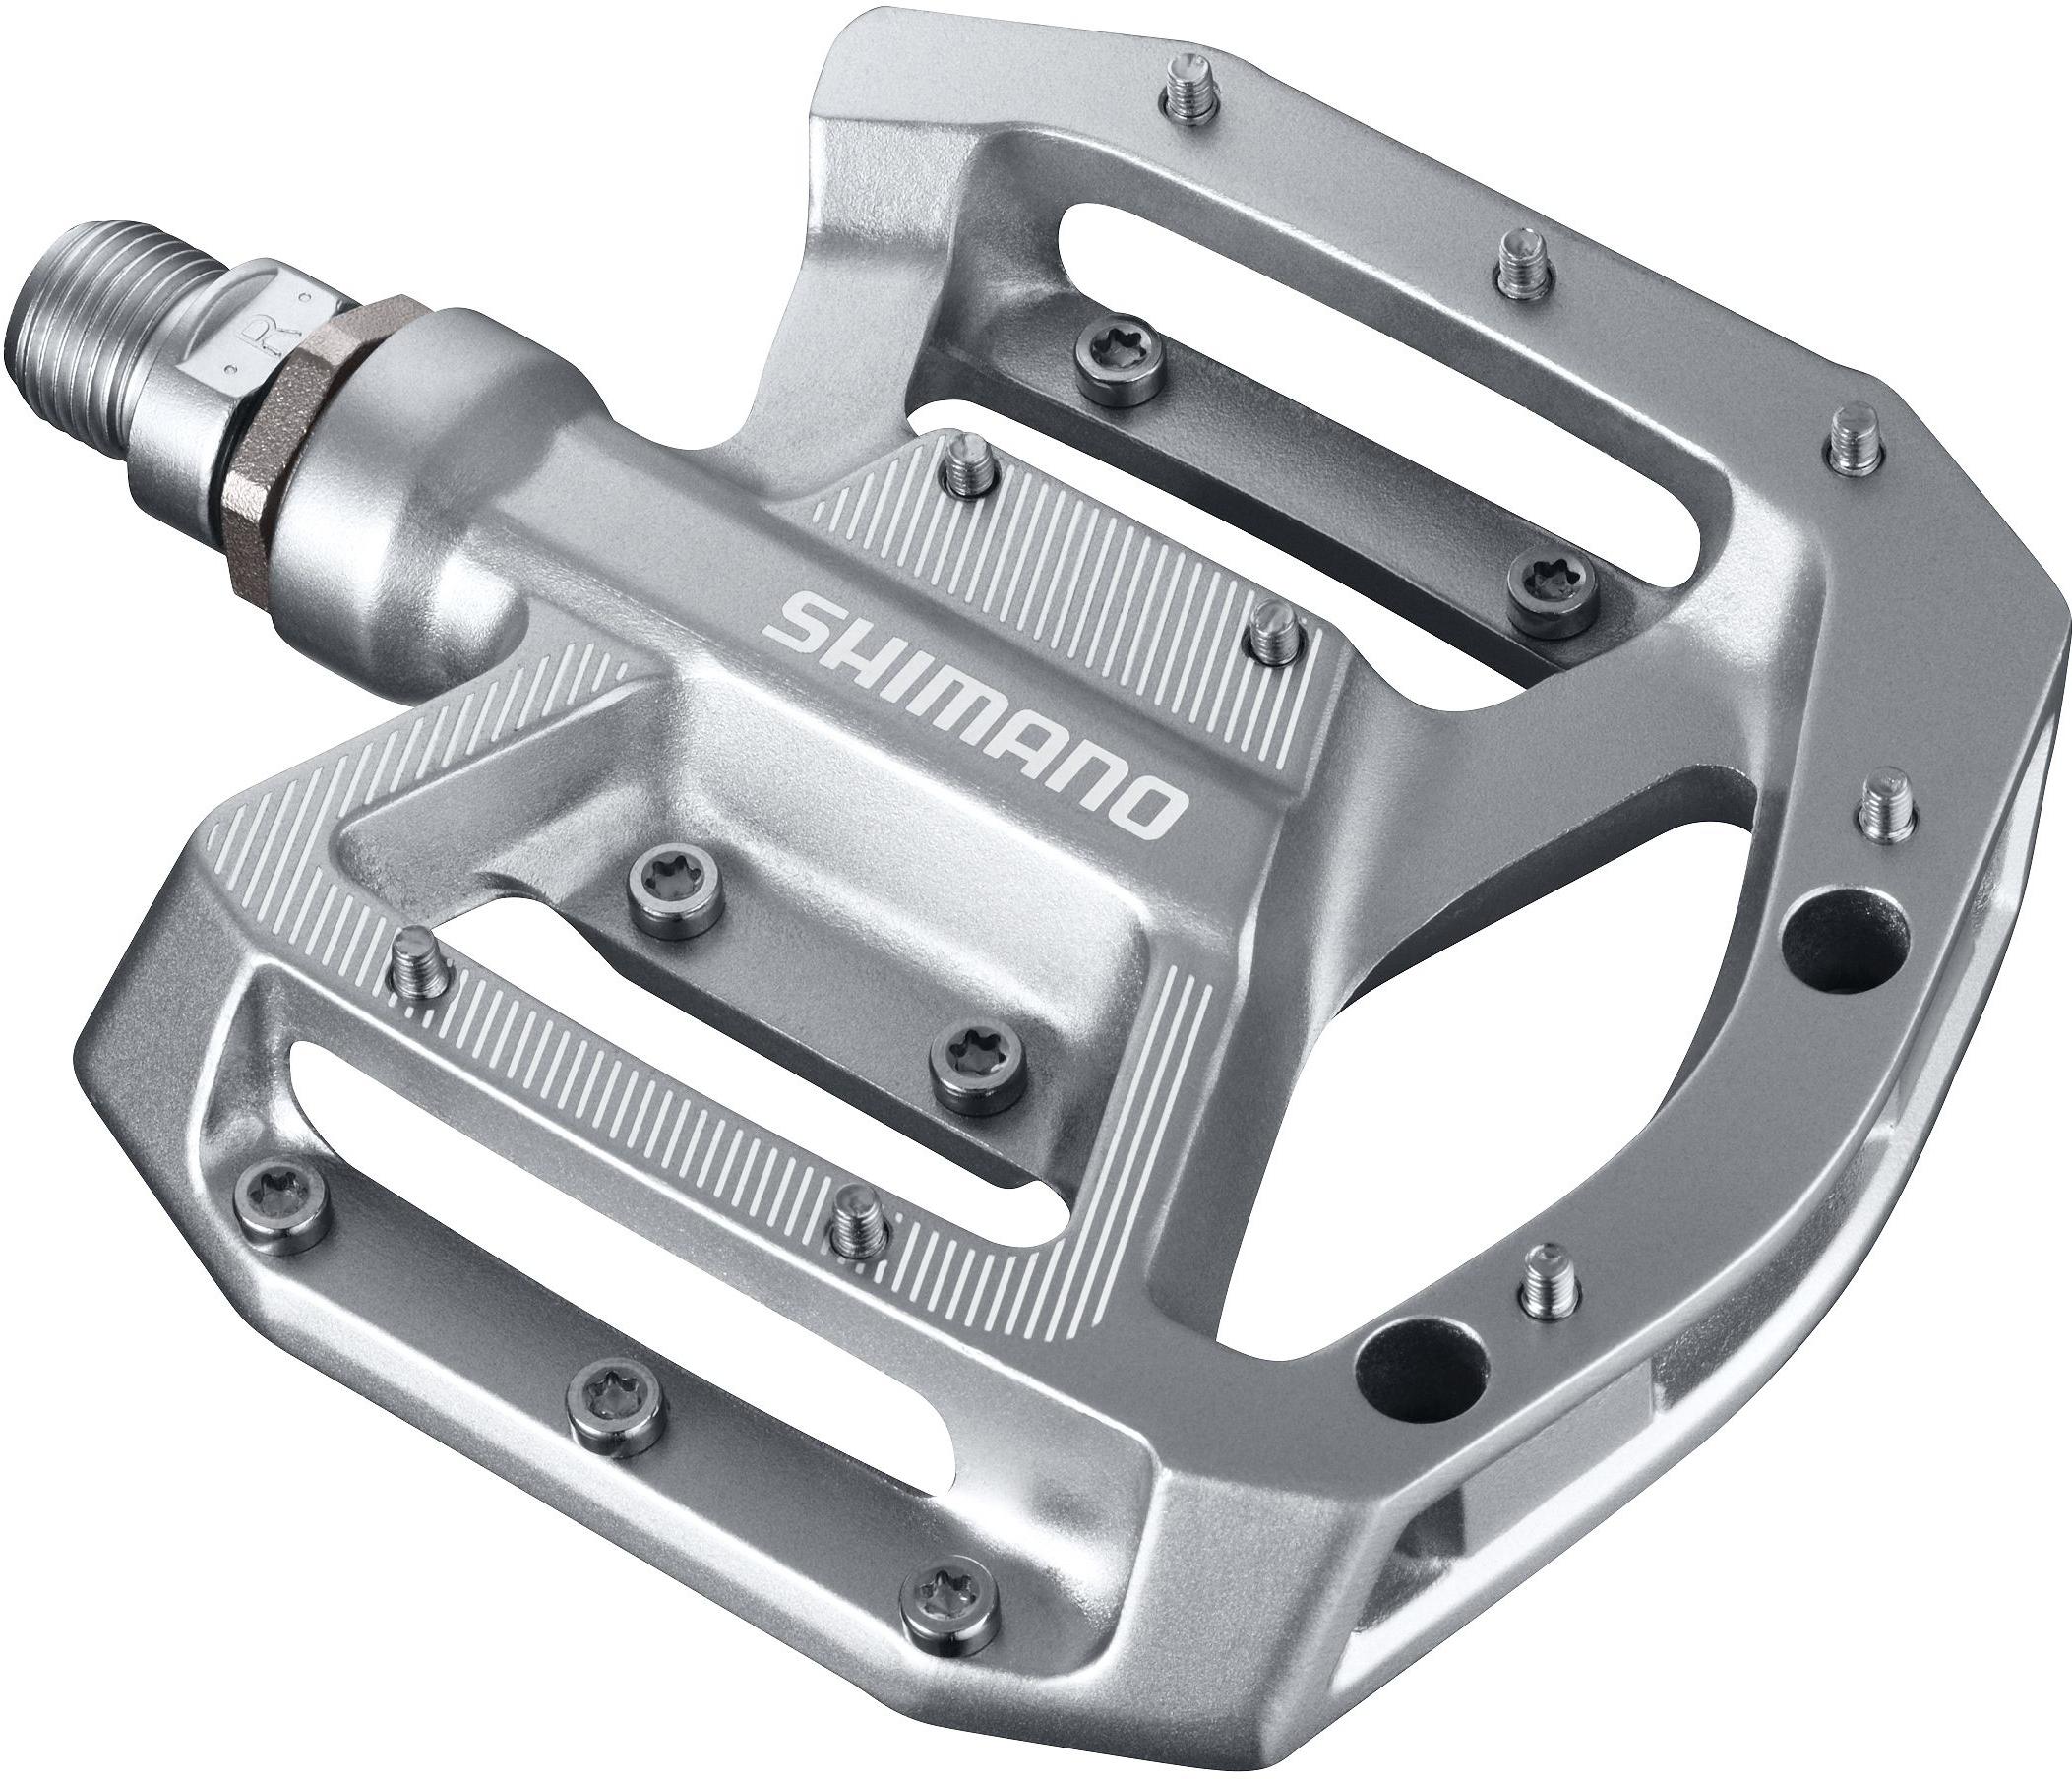 Shimano Gr500 Flat Mtb Pedals Large - Silver